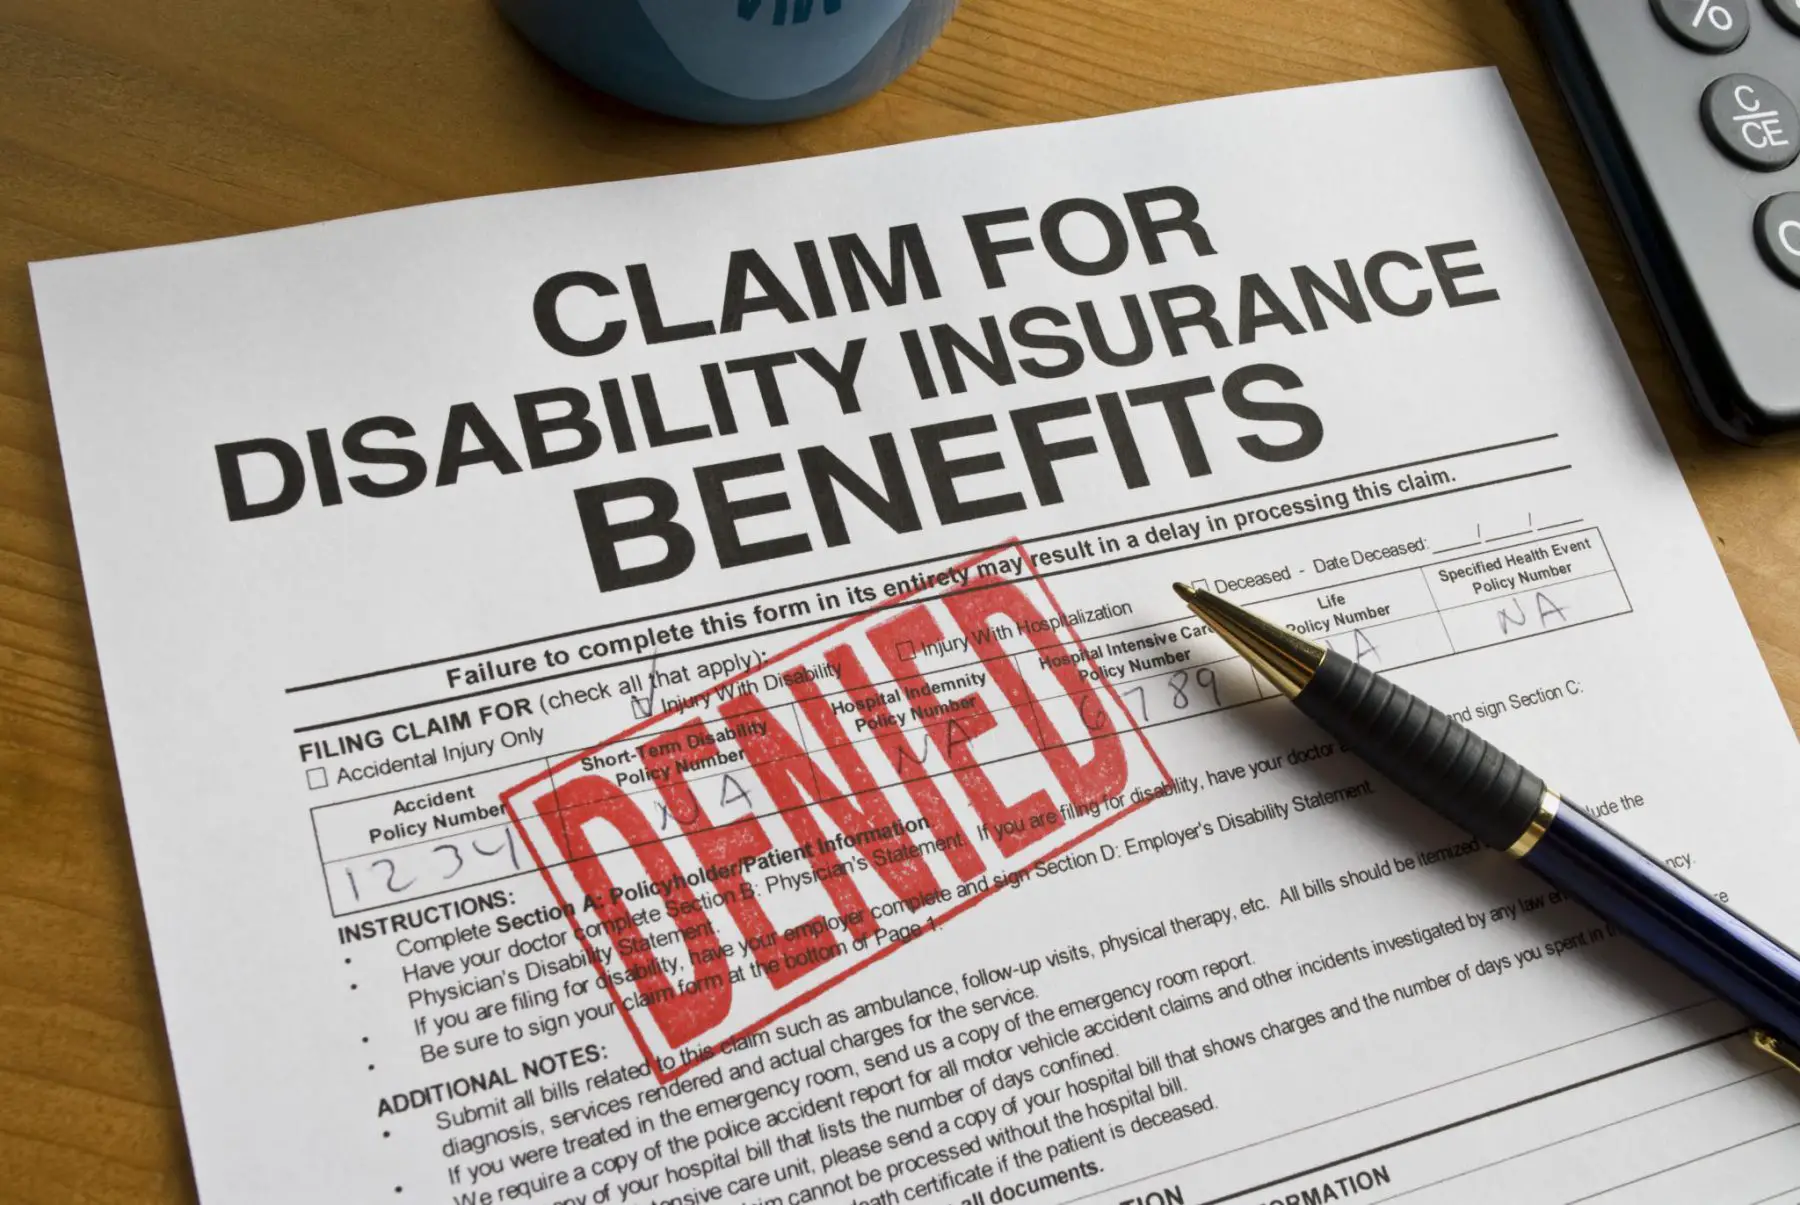 What To Do If Your Disability Benefits Application is Denied